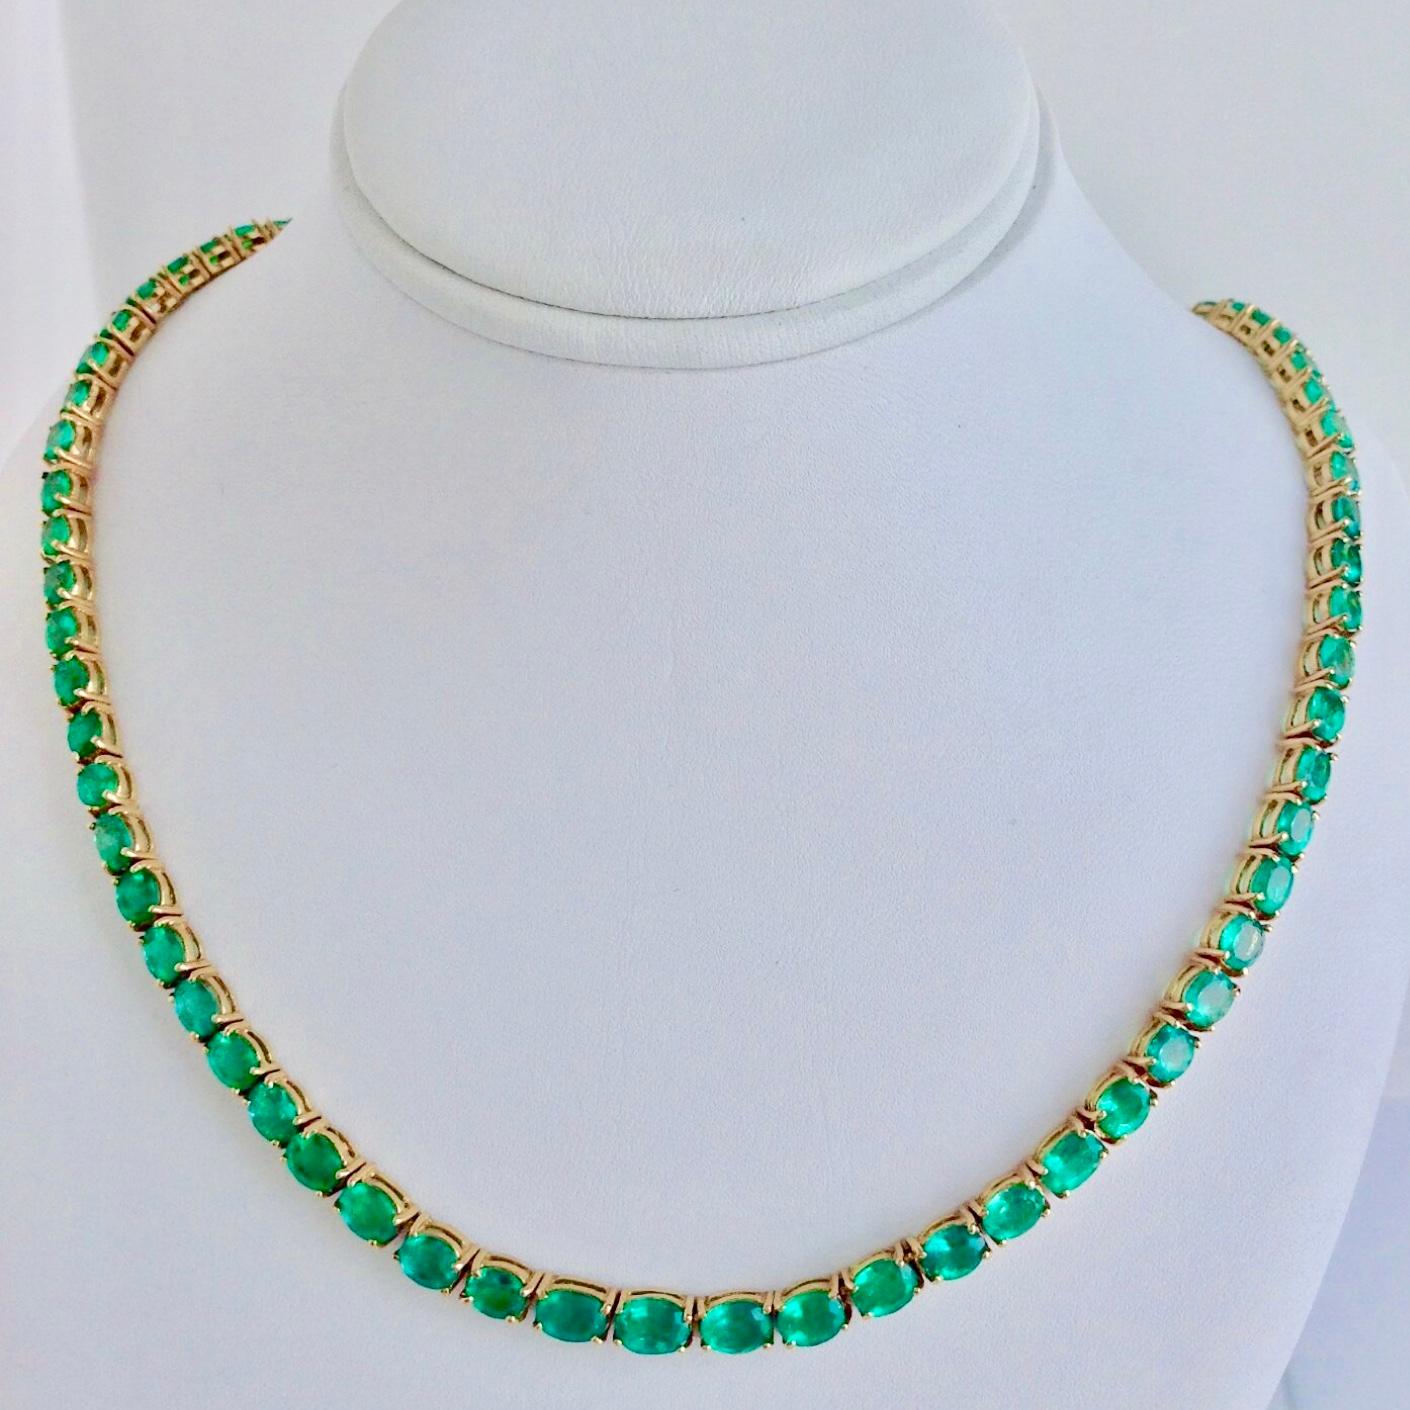 Oval Cut 25 Carat Natural Oval Emerald Necklace 18 Karat Yellow Gold For Sale